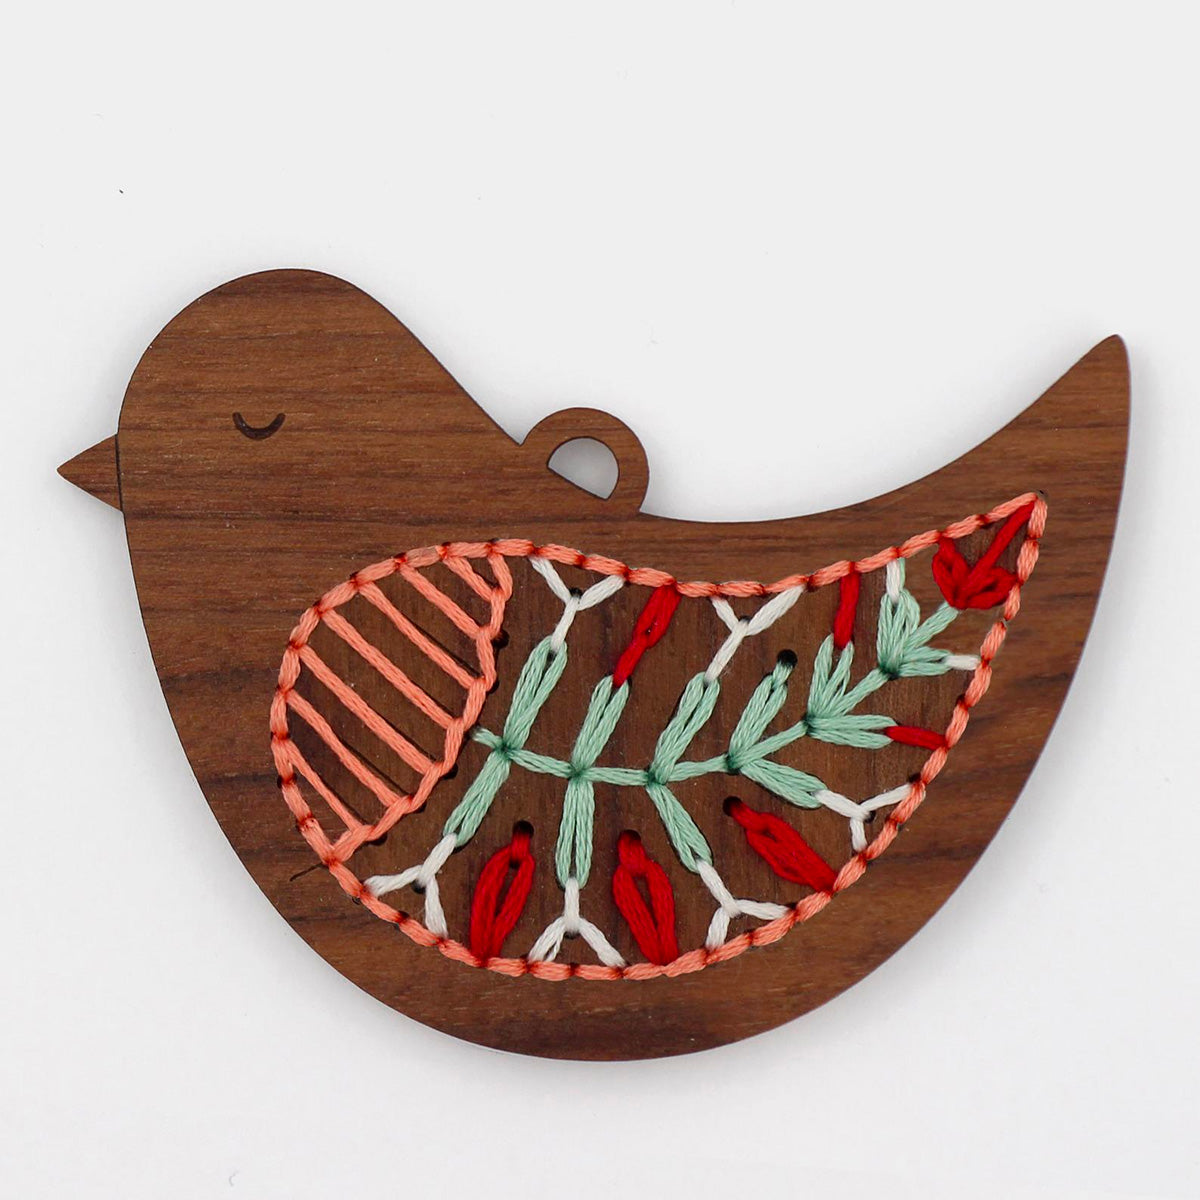 Hand Embroidered Wood Ornament Kit - Bird